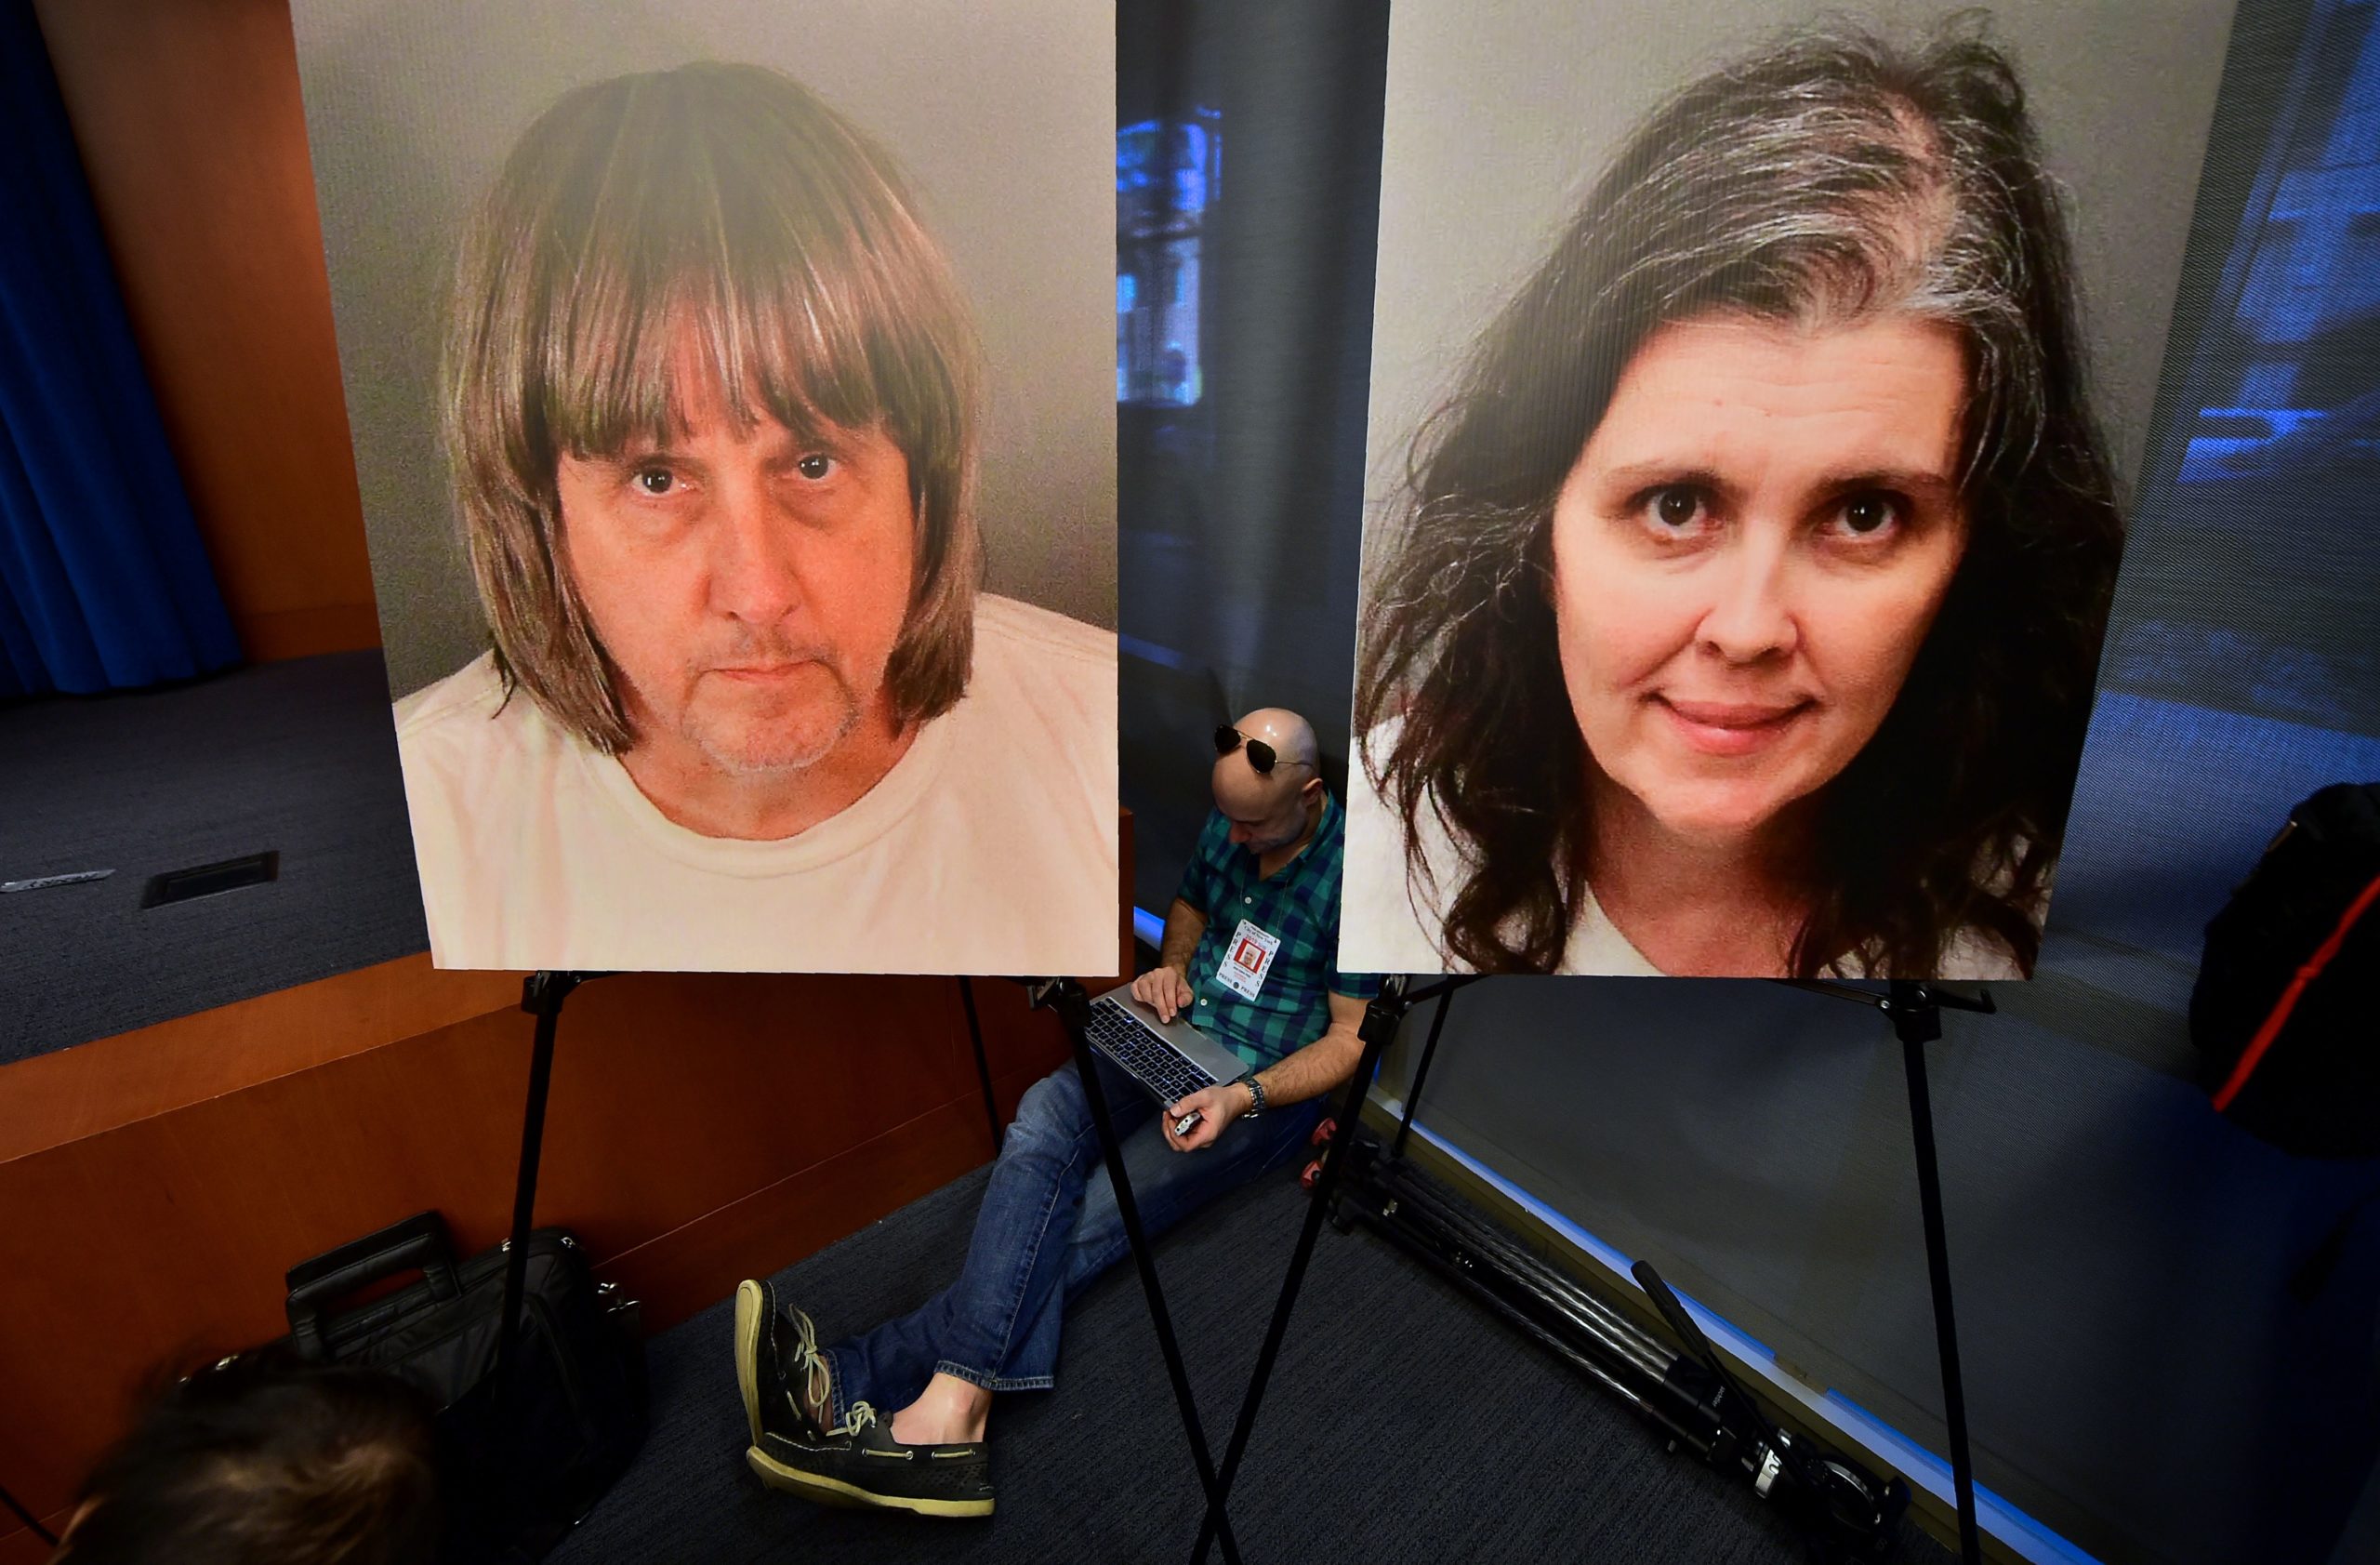 A journalist sits between portraits of David and Louise Turpin awaiting a press briefing in Riverside, California on January 18, 2018. David Allen Turpin, 57, and his wife Louise Anna Turpin, 49 were hit with 12 counts of torture, 12 of false imprisonment, six of child abuse and six of abuse of a dependent adult at a court hearing in the city of Riverside. David Turpin was also charged with committing a lewd act against a child by force or fear or duress, District Attorney Mike Hestrin told a press conference. (FREDERIC J. BROWN/AFP via Getty Images)